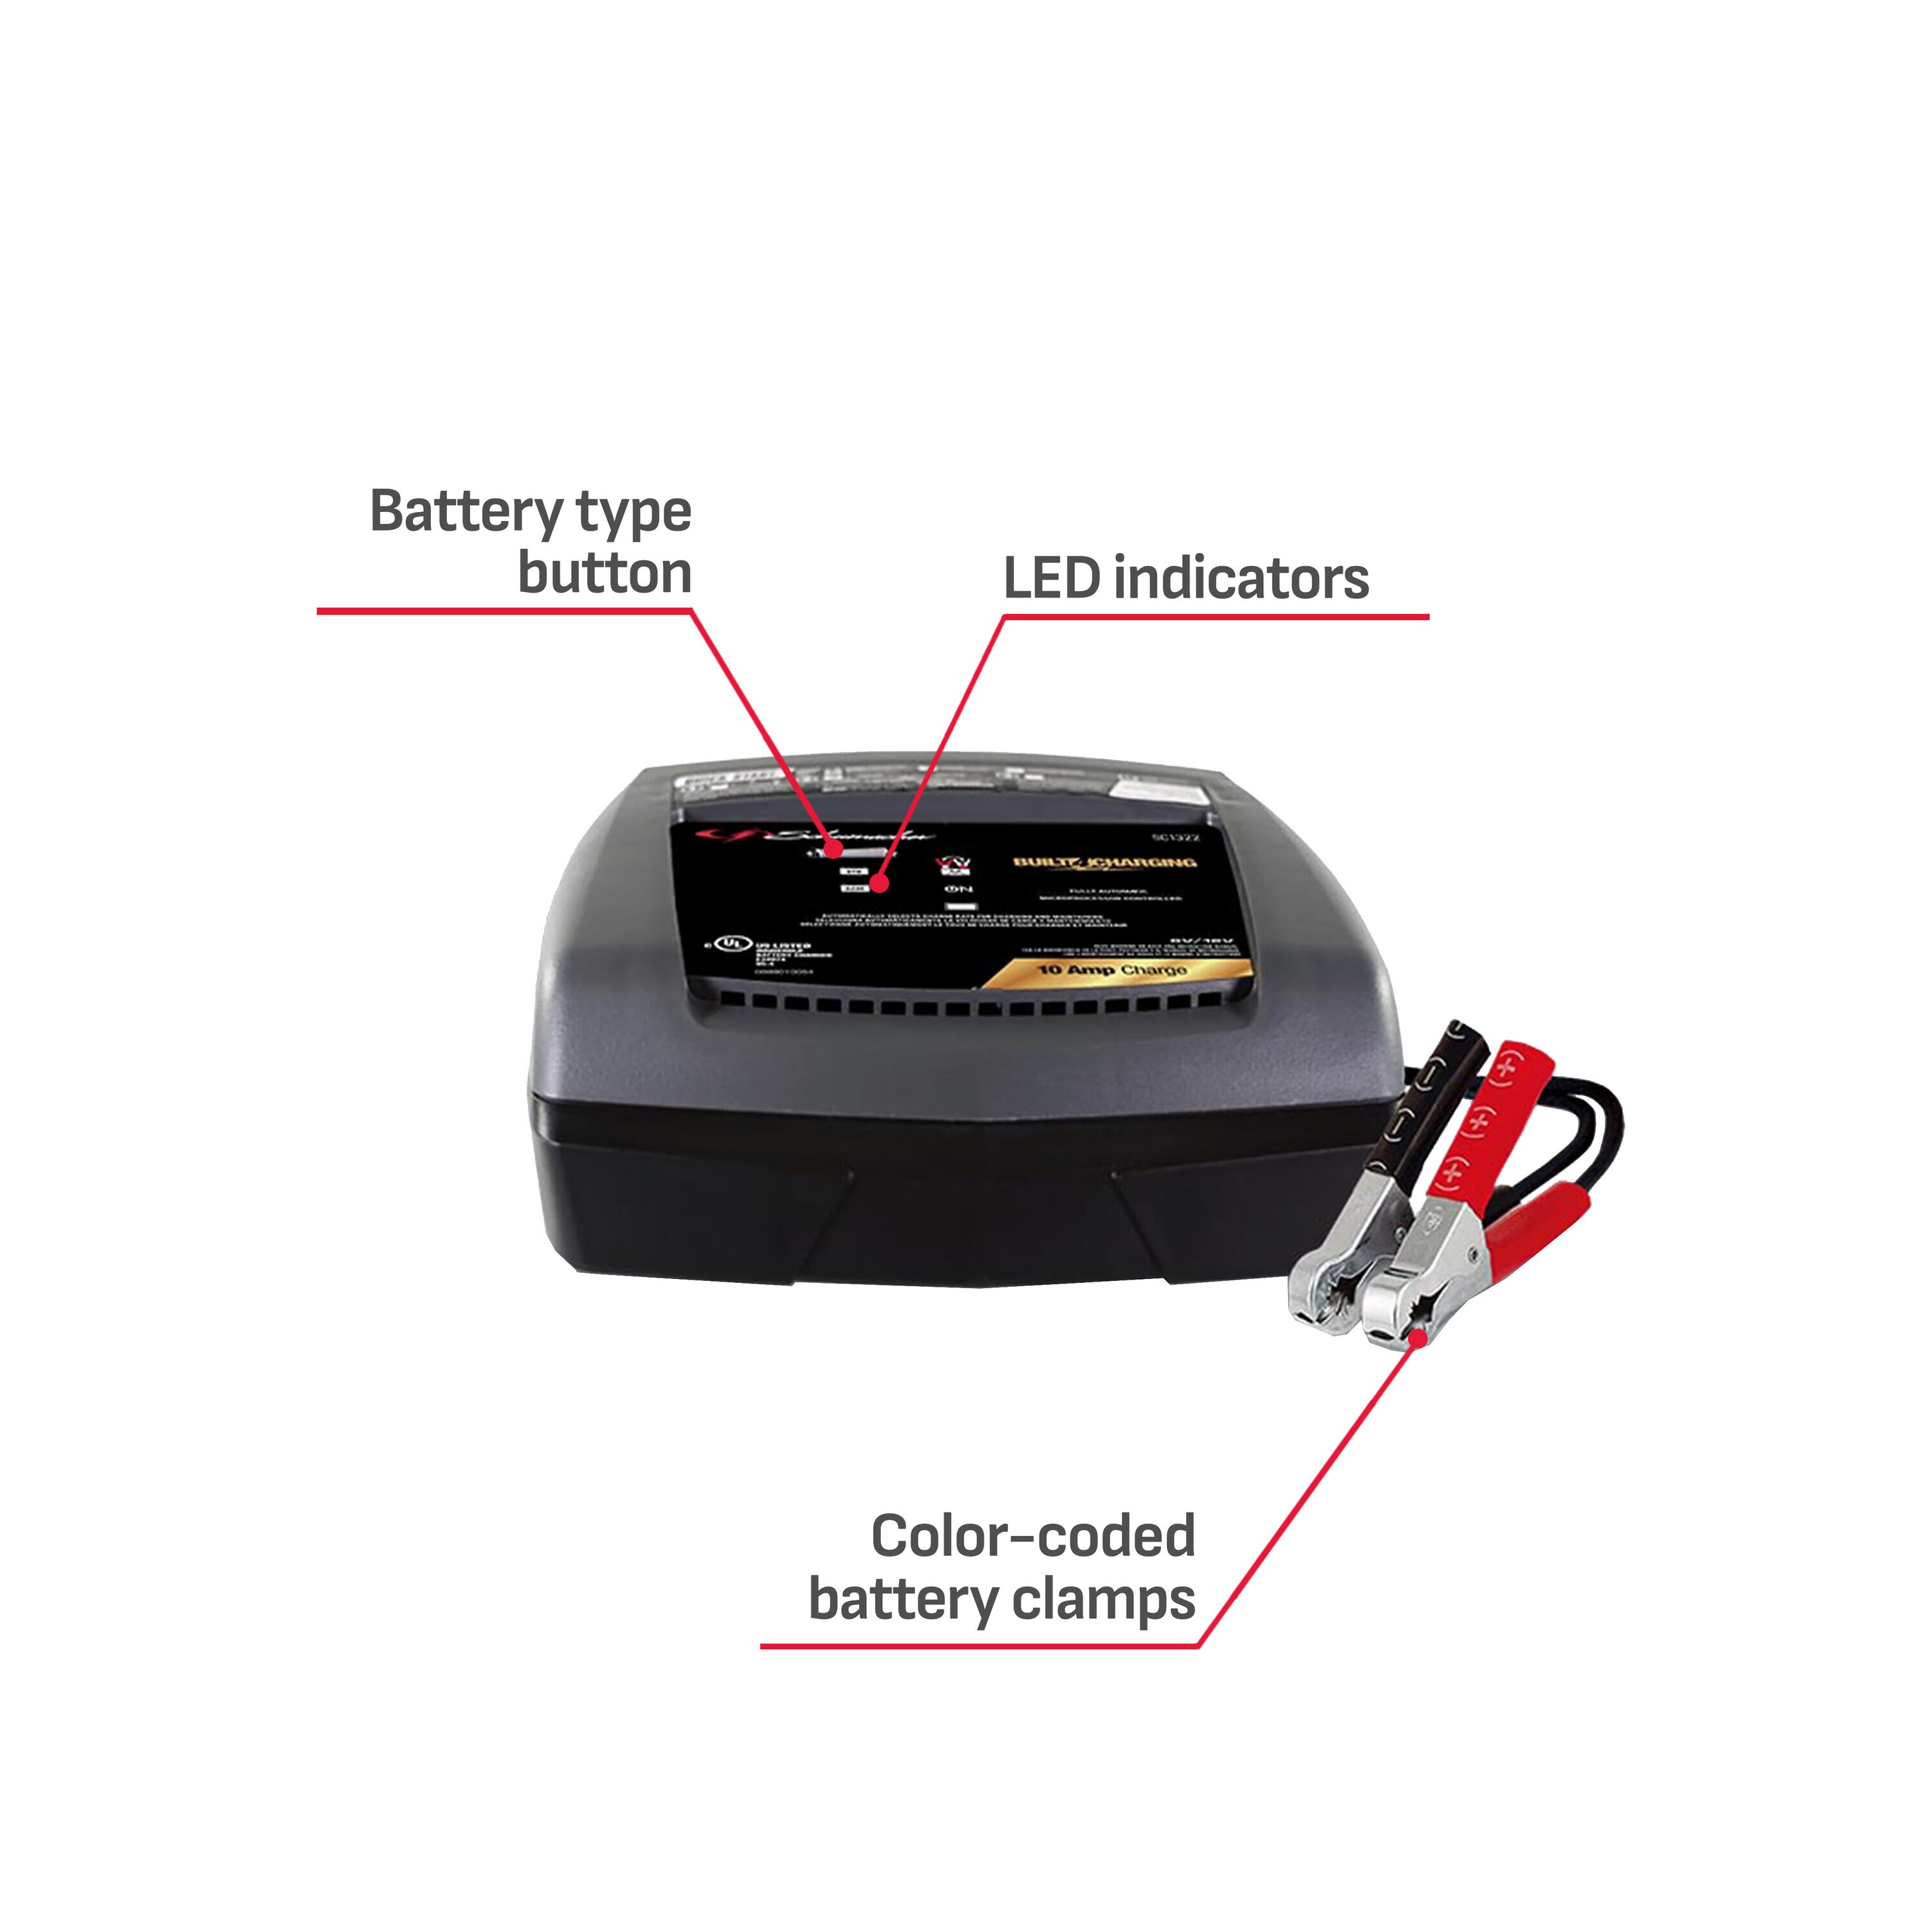 Amped Outdoors 10A Battery Charger